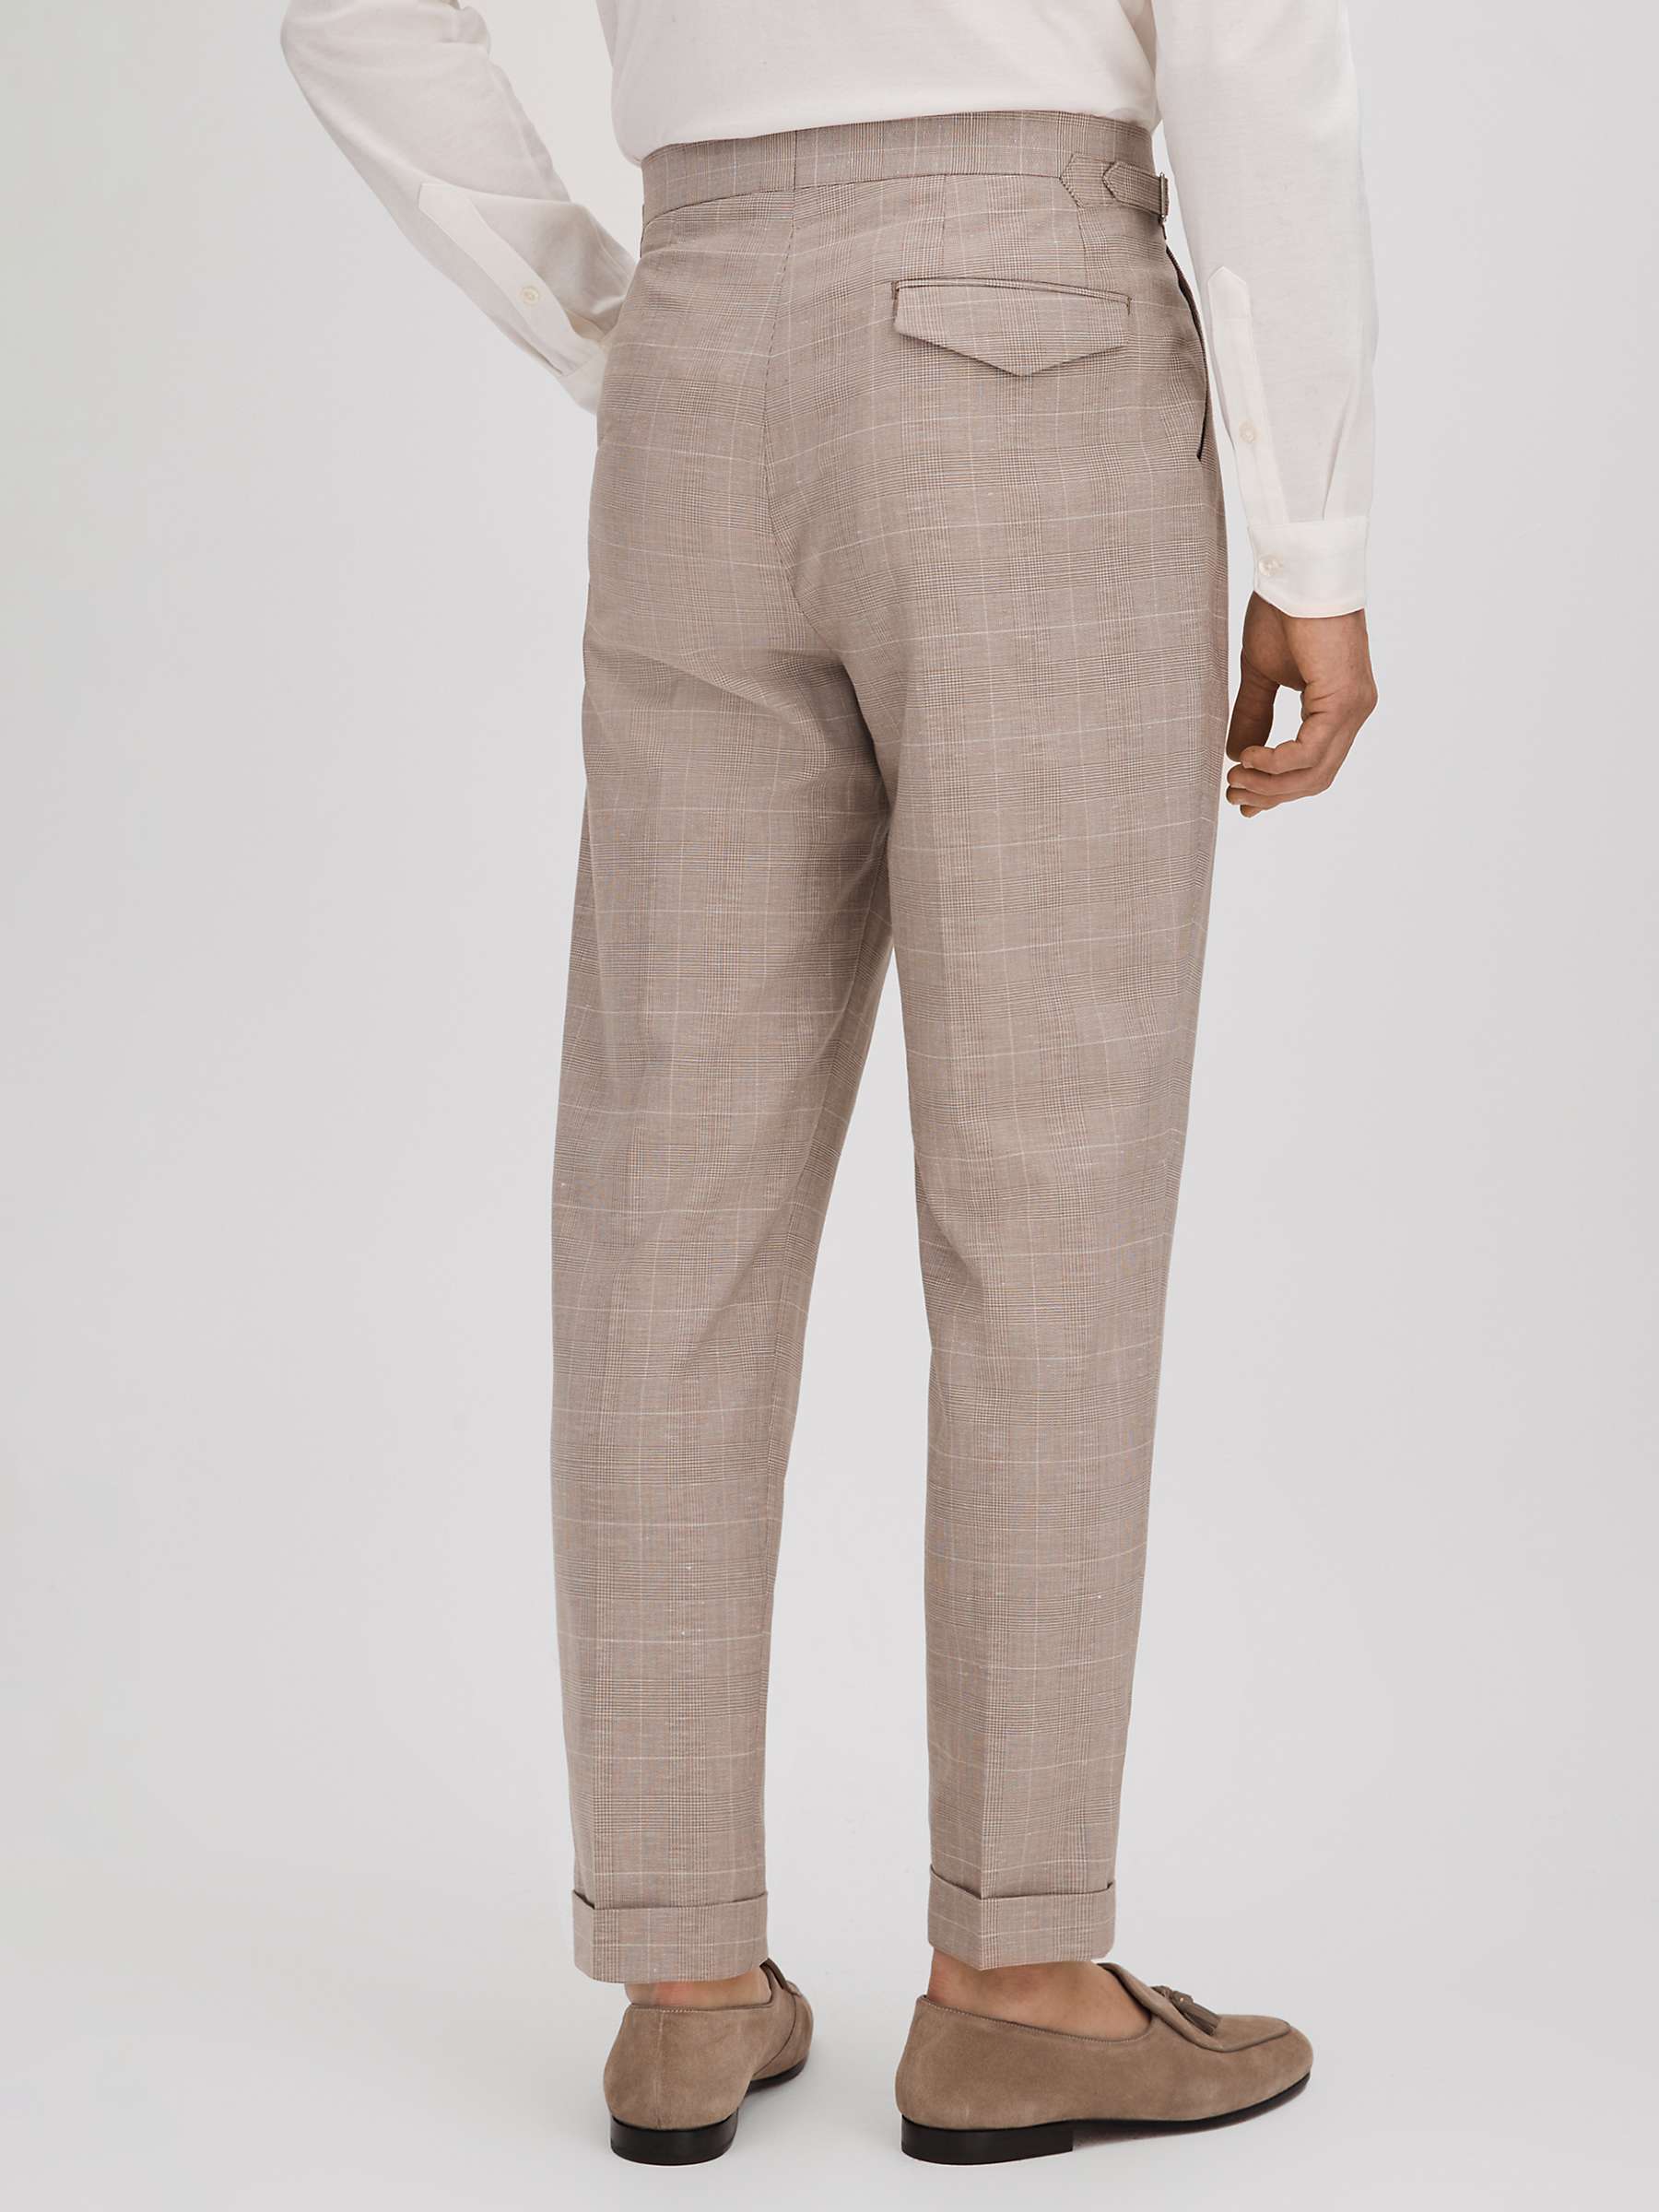 Buy Reiss Collect Hopsack Check Trousers, Oatmeal Online at johnlewis.com